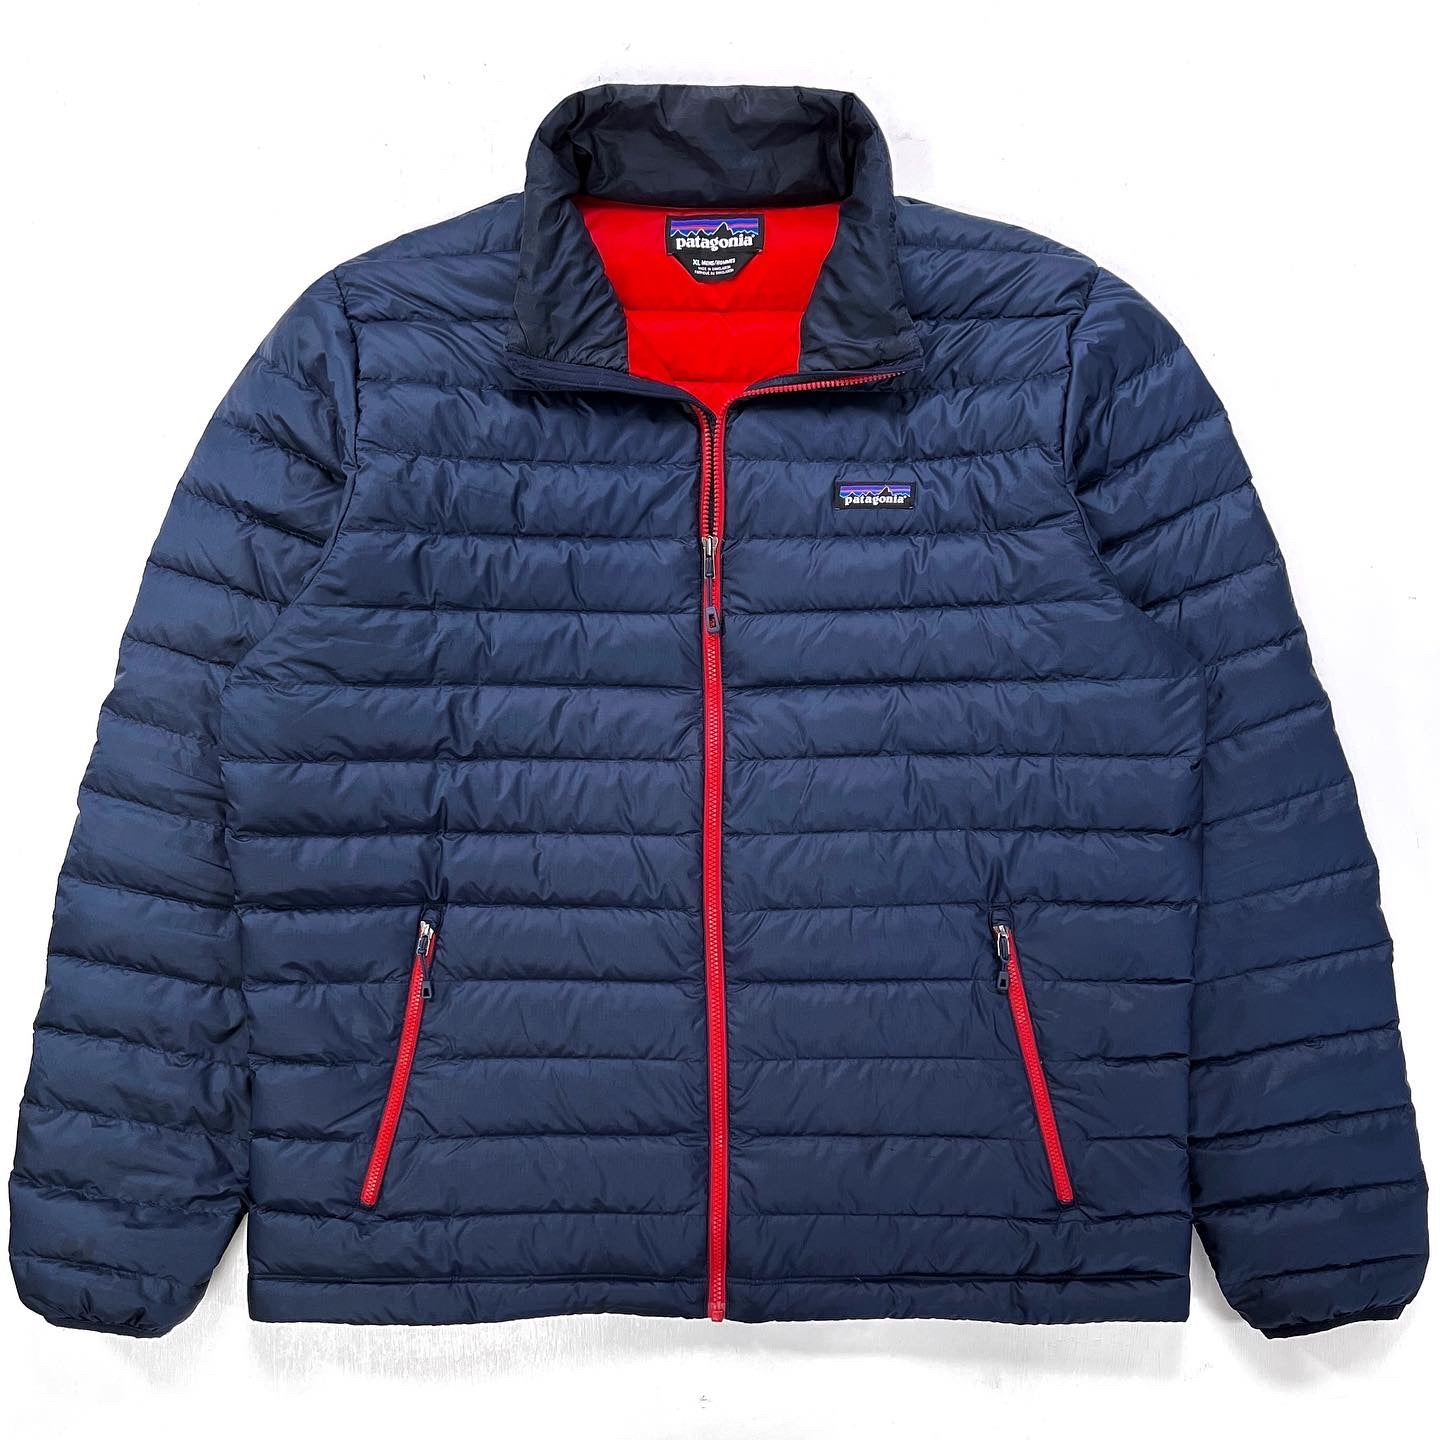 2016 Patagonia Mens Down Sweater, Classic Navy & Red (XL)